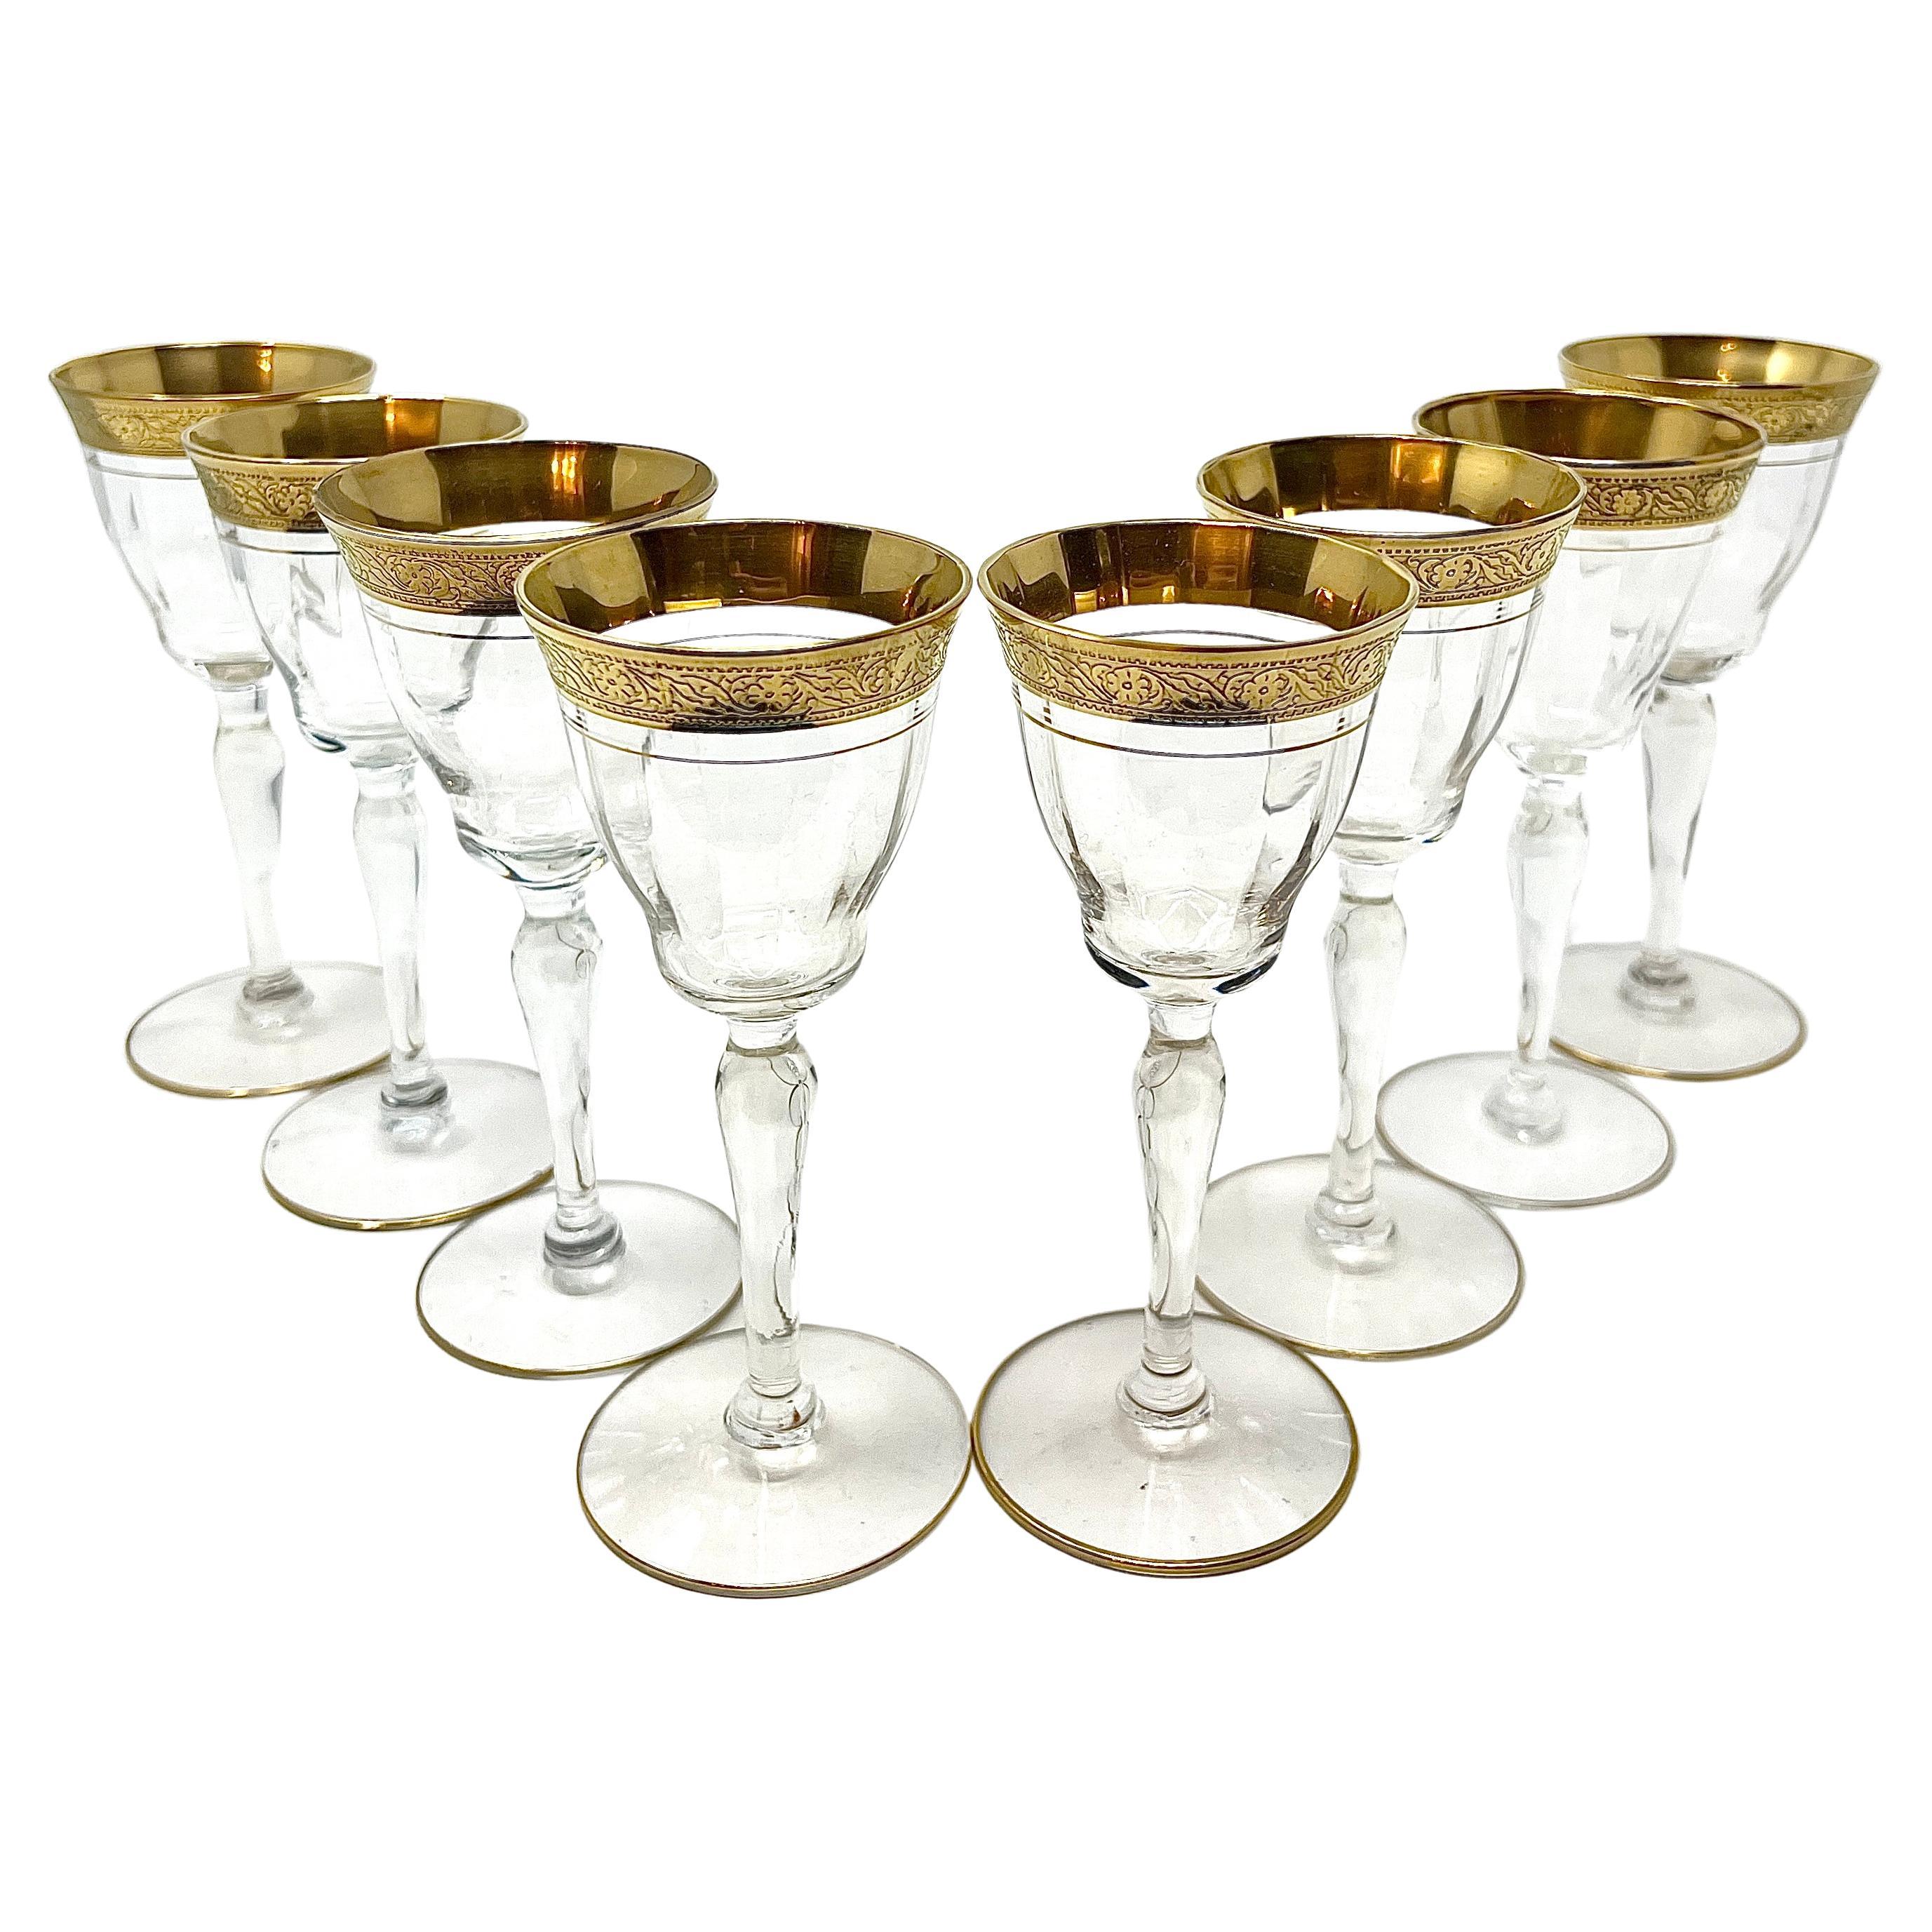 Set of 8 Estate Cut Crystal with Gold Etching Cordial Glasses, Circa 1930-1940. For Sale